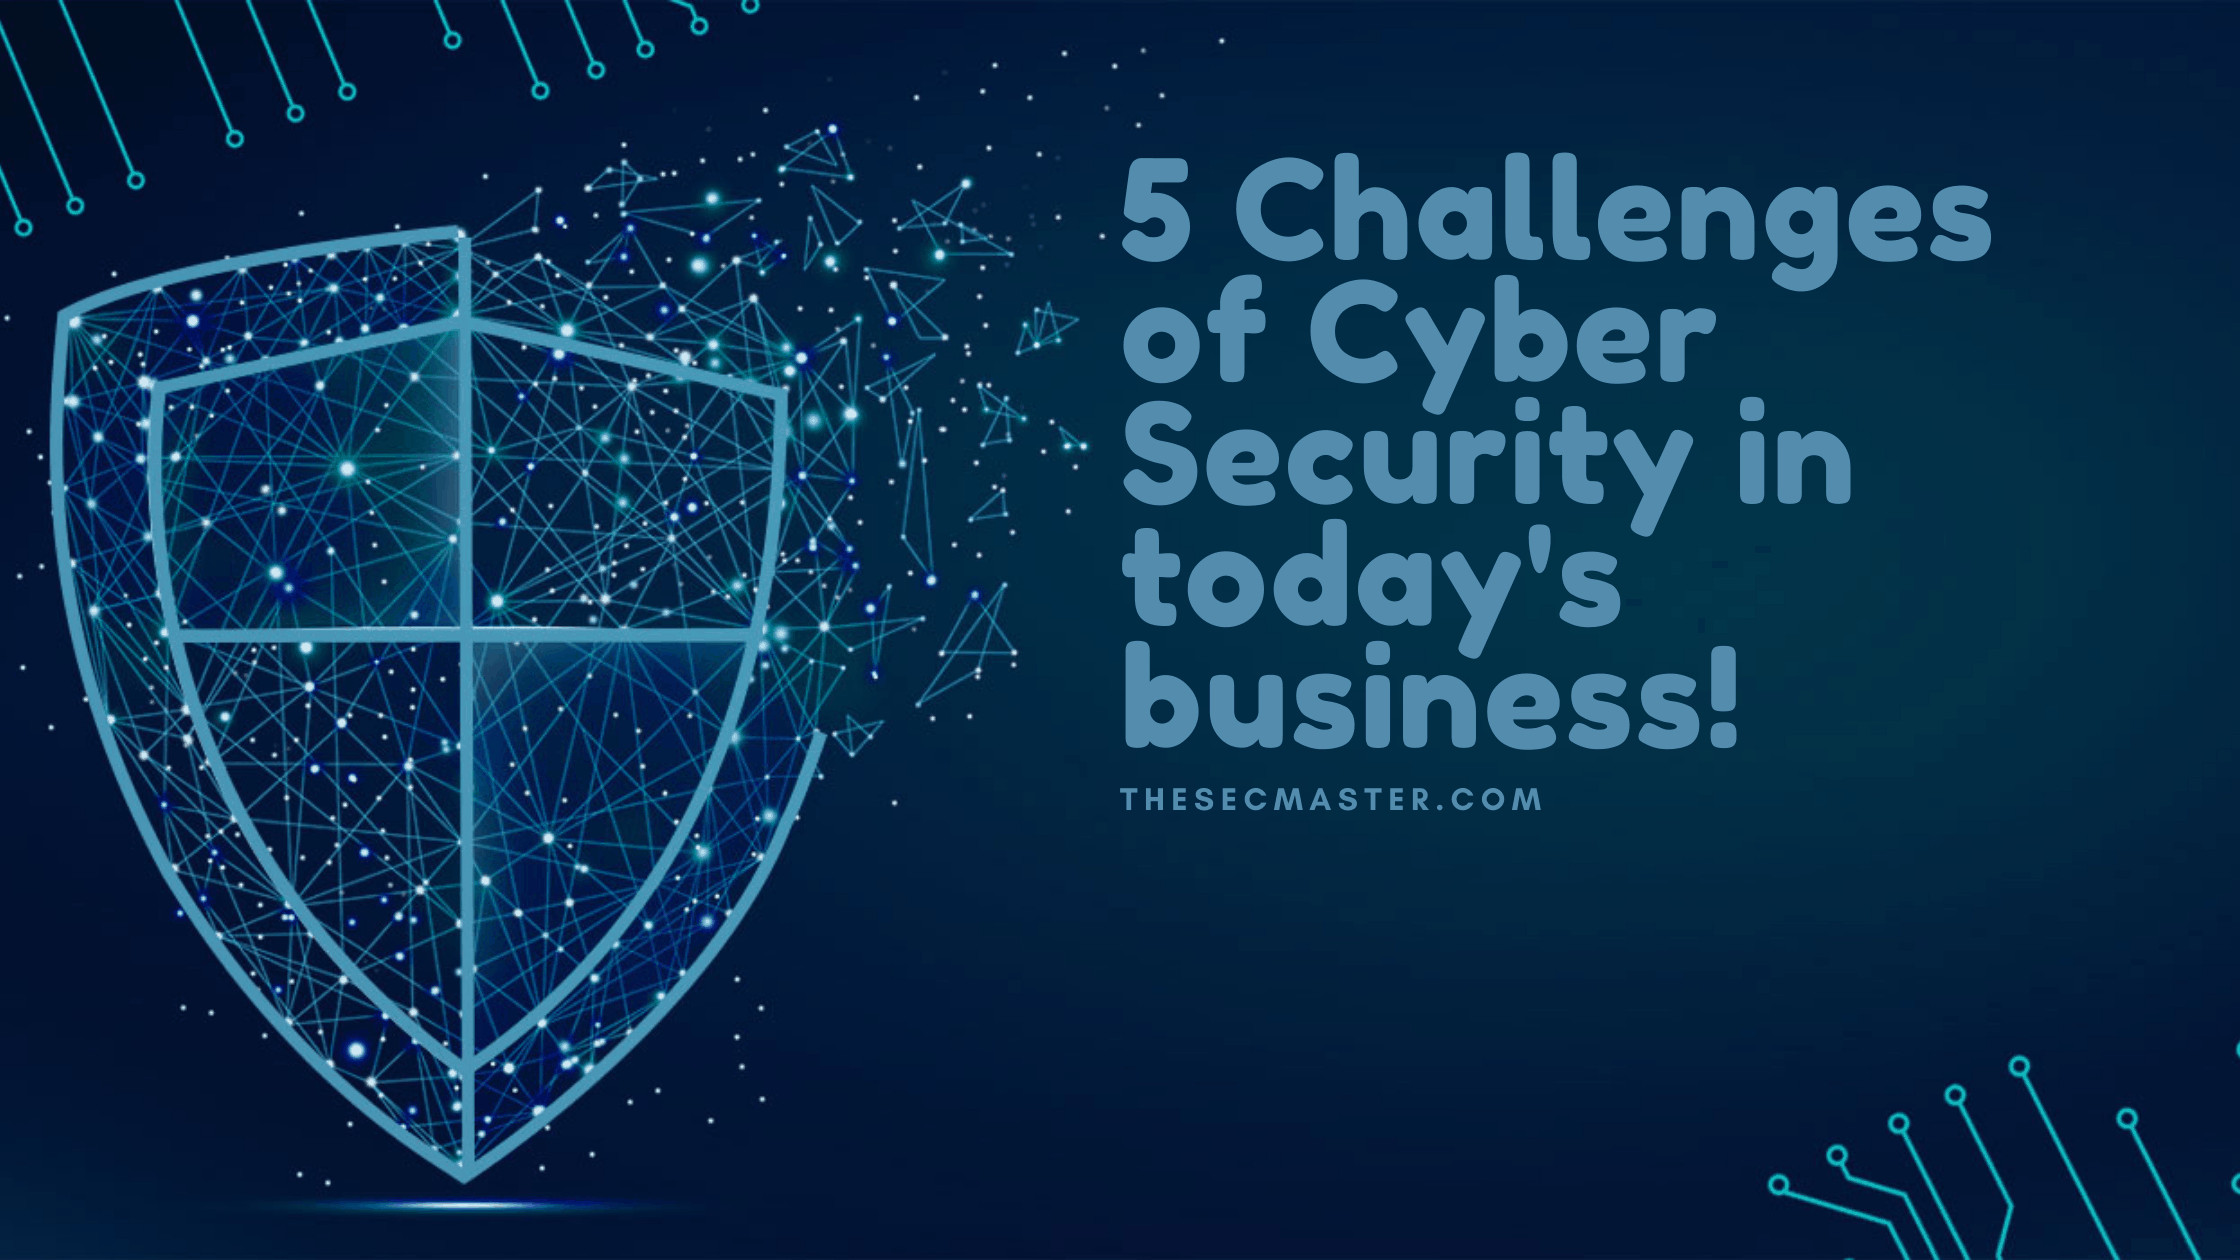 5 Challenges Of Cyber Security In Todays Business